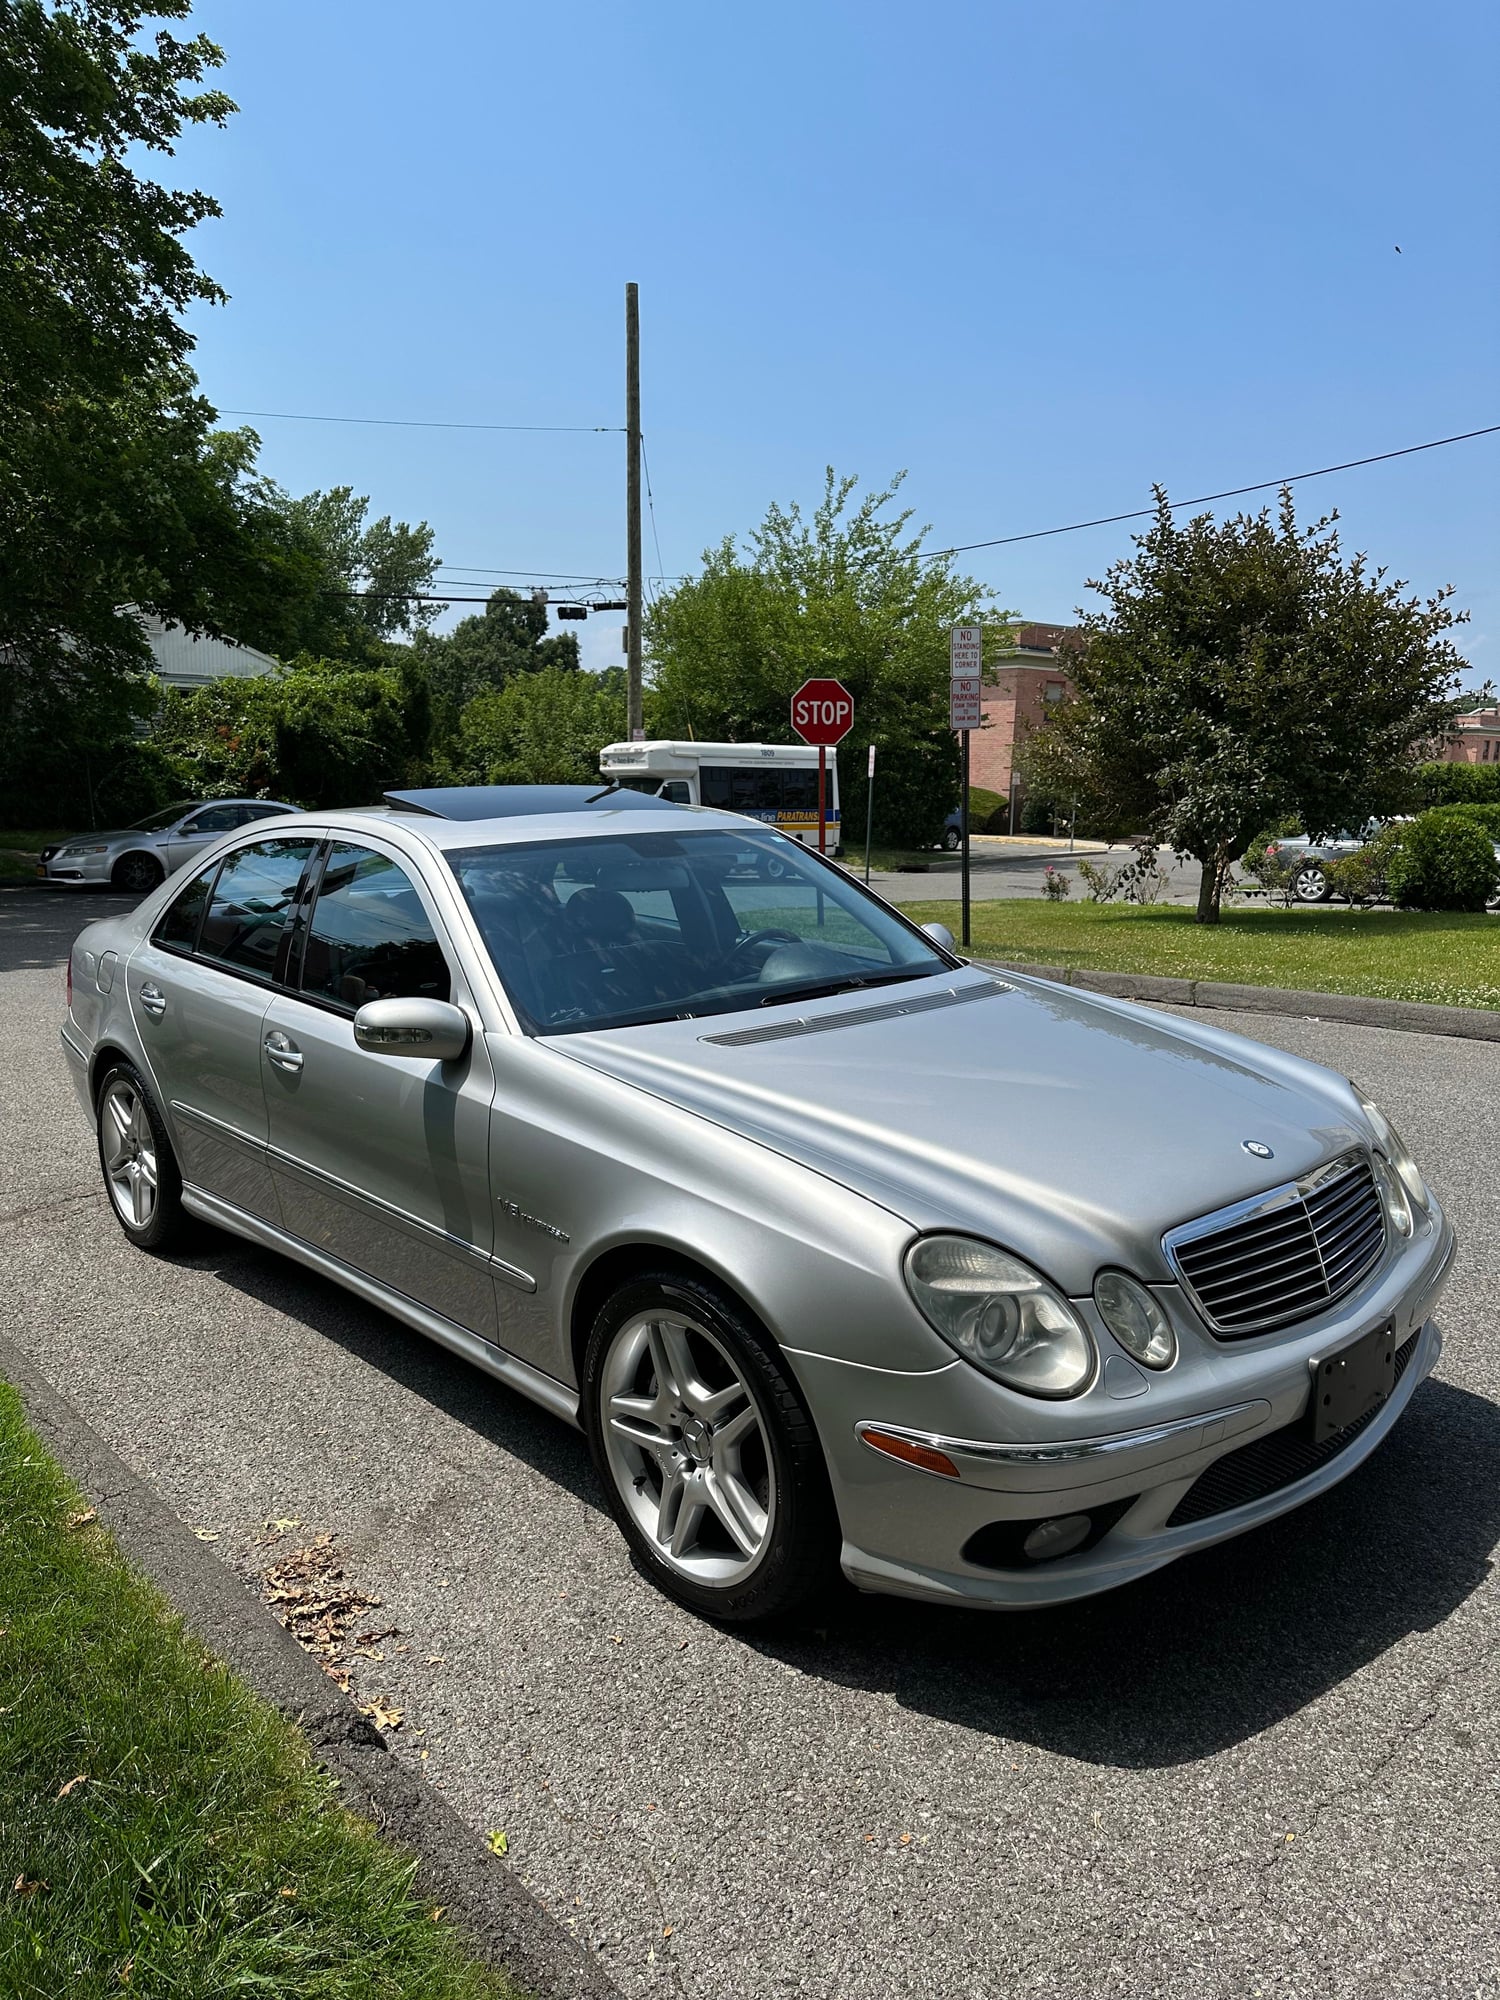 2005 Mercedes-Benz E55 AMG - 2005 Mercedes Benz E55 AMG - Used - VIN WDBUF76J05A78 - 129,000 Miles - 8 cyl - 2WD - Automatic - Sedan - Silver - Port Chester, NY 10573, United States